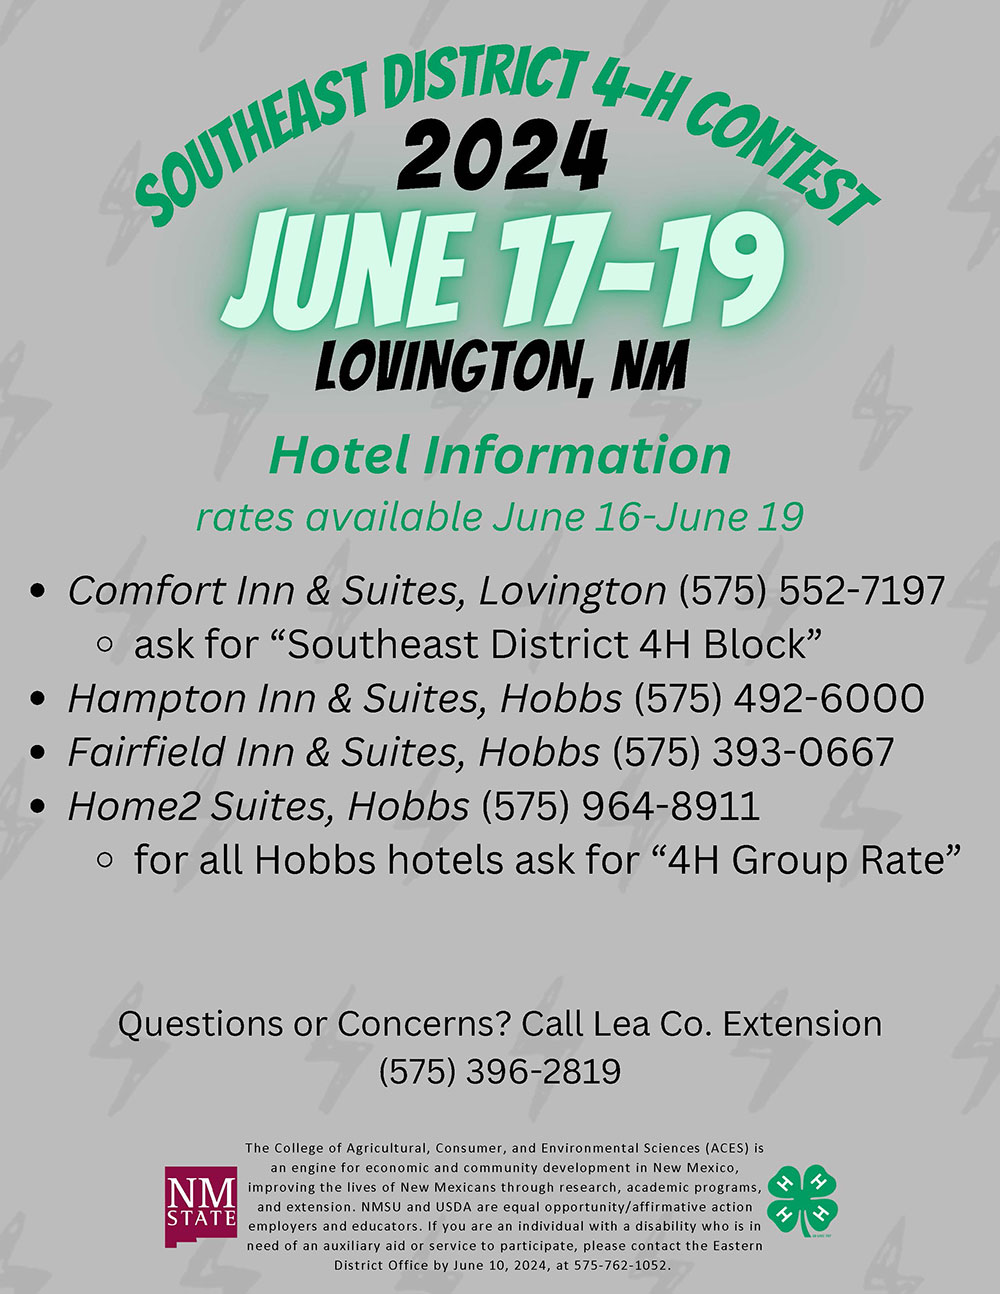 Hotel information for 4H Fair